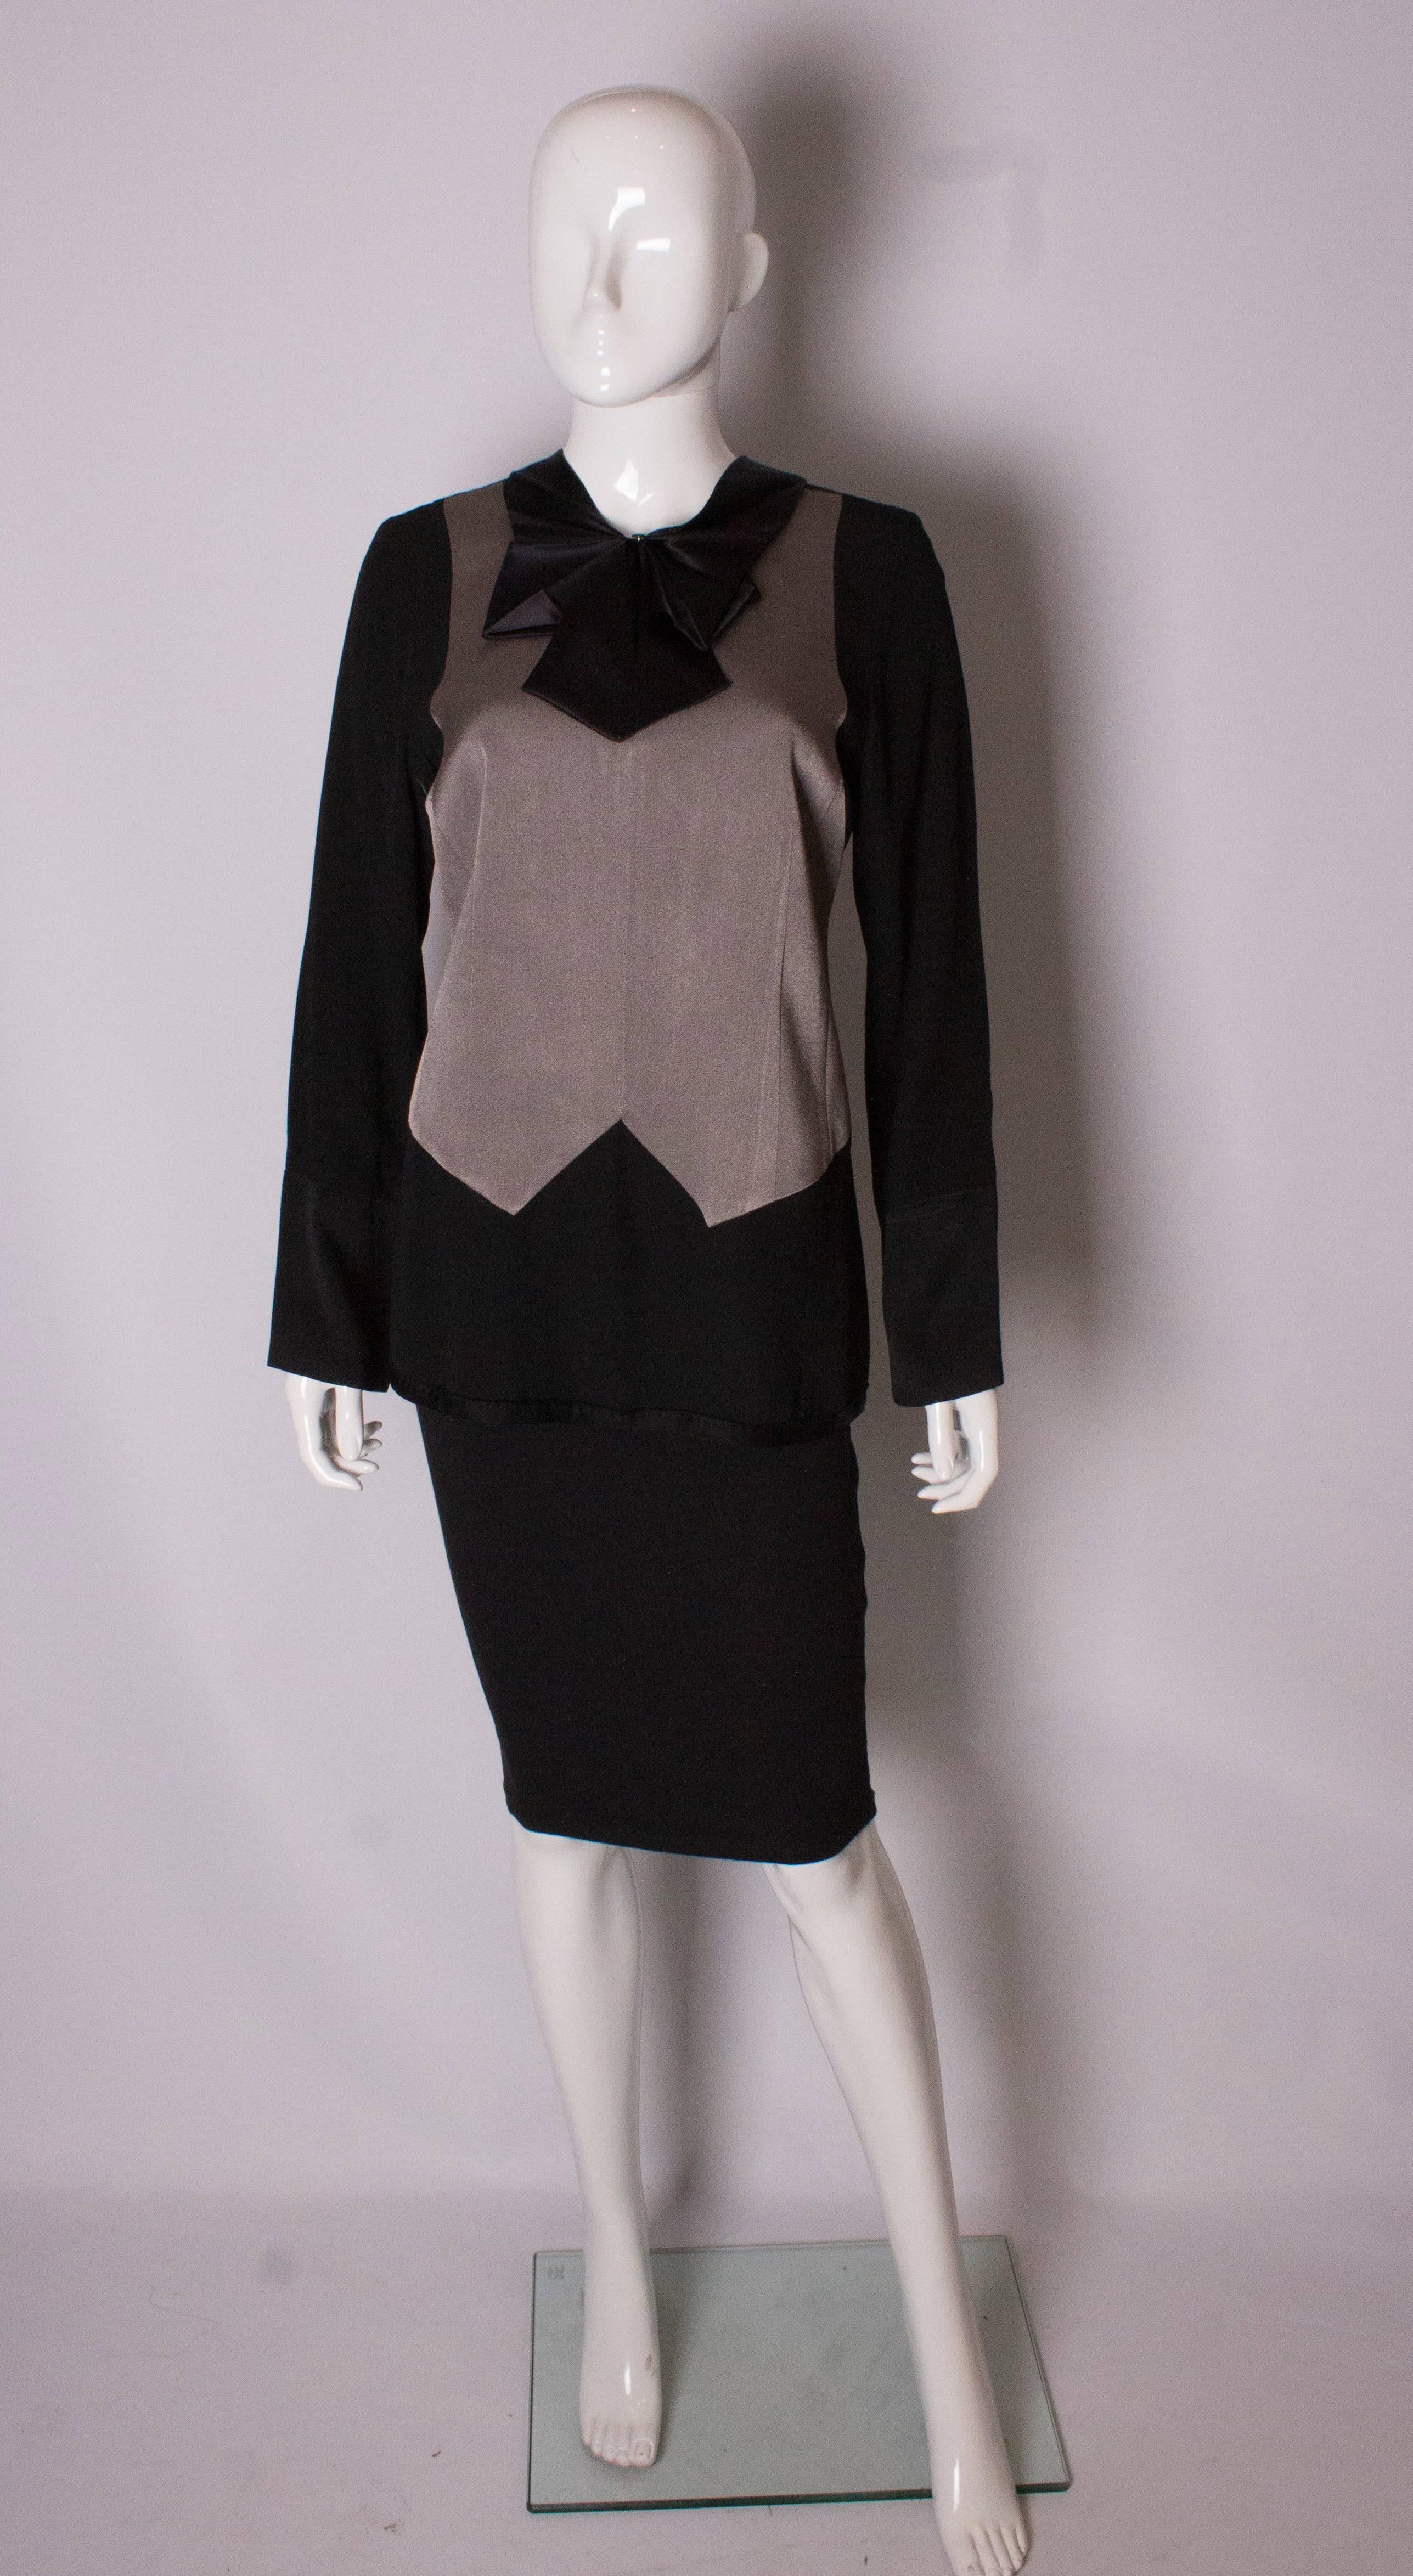 A chic top by Marc Jacobs. In grey and black, the top has a zip opening at the back, ribbon detail at the neck and hem and a satin bow at the front.